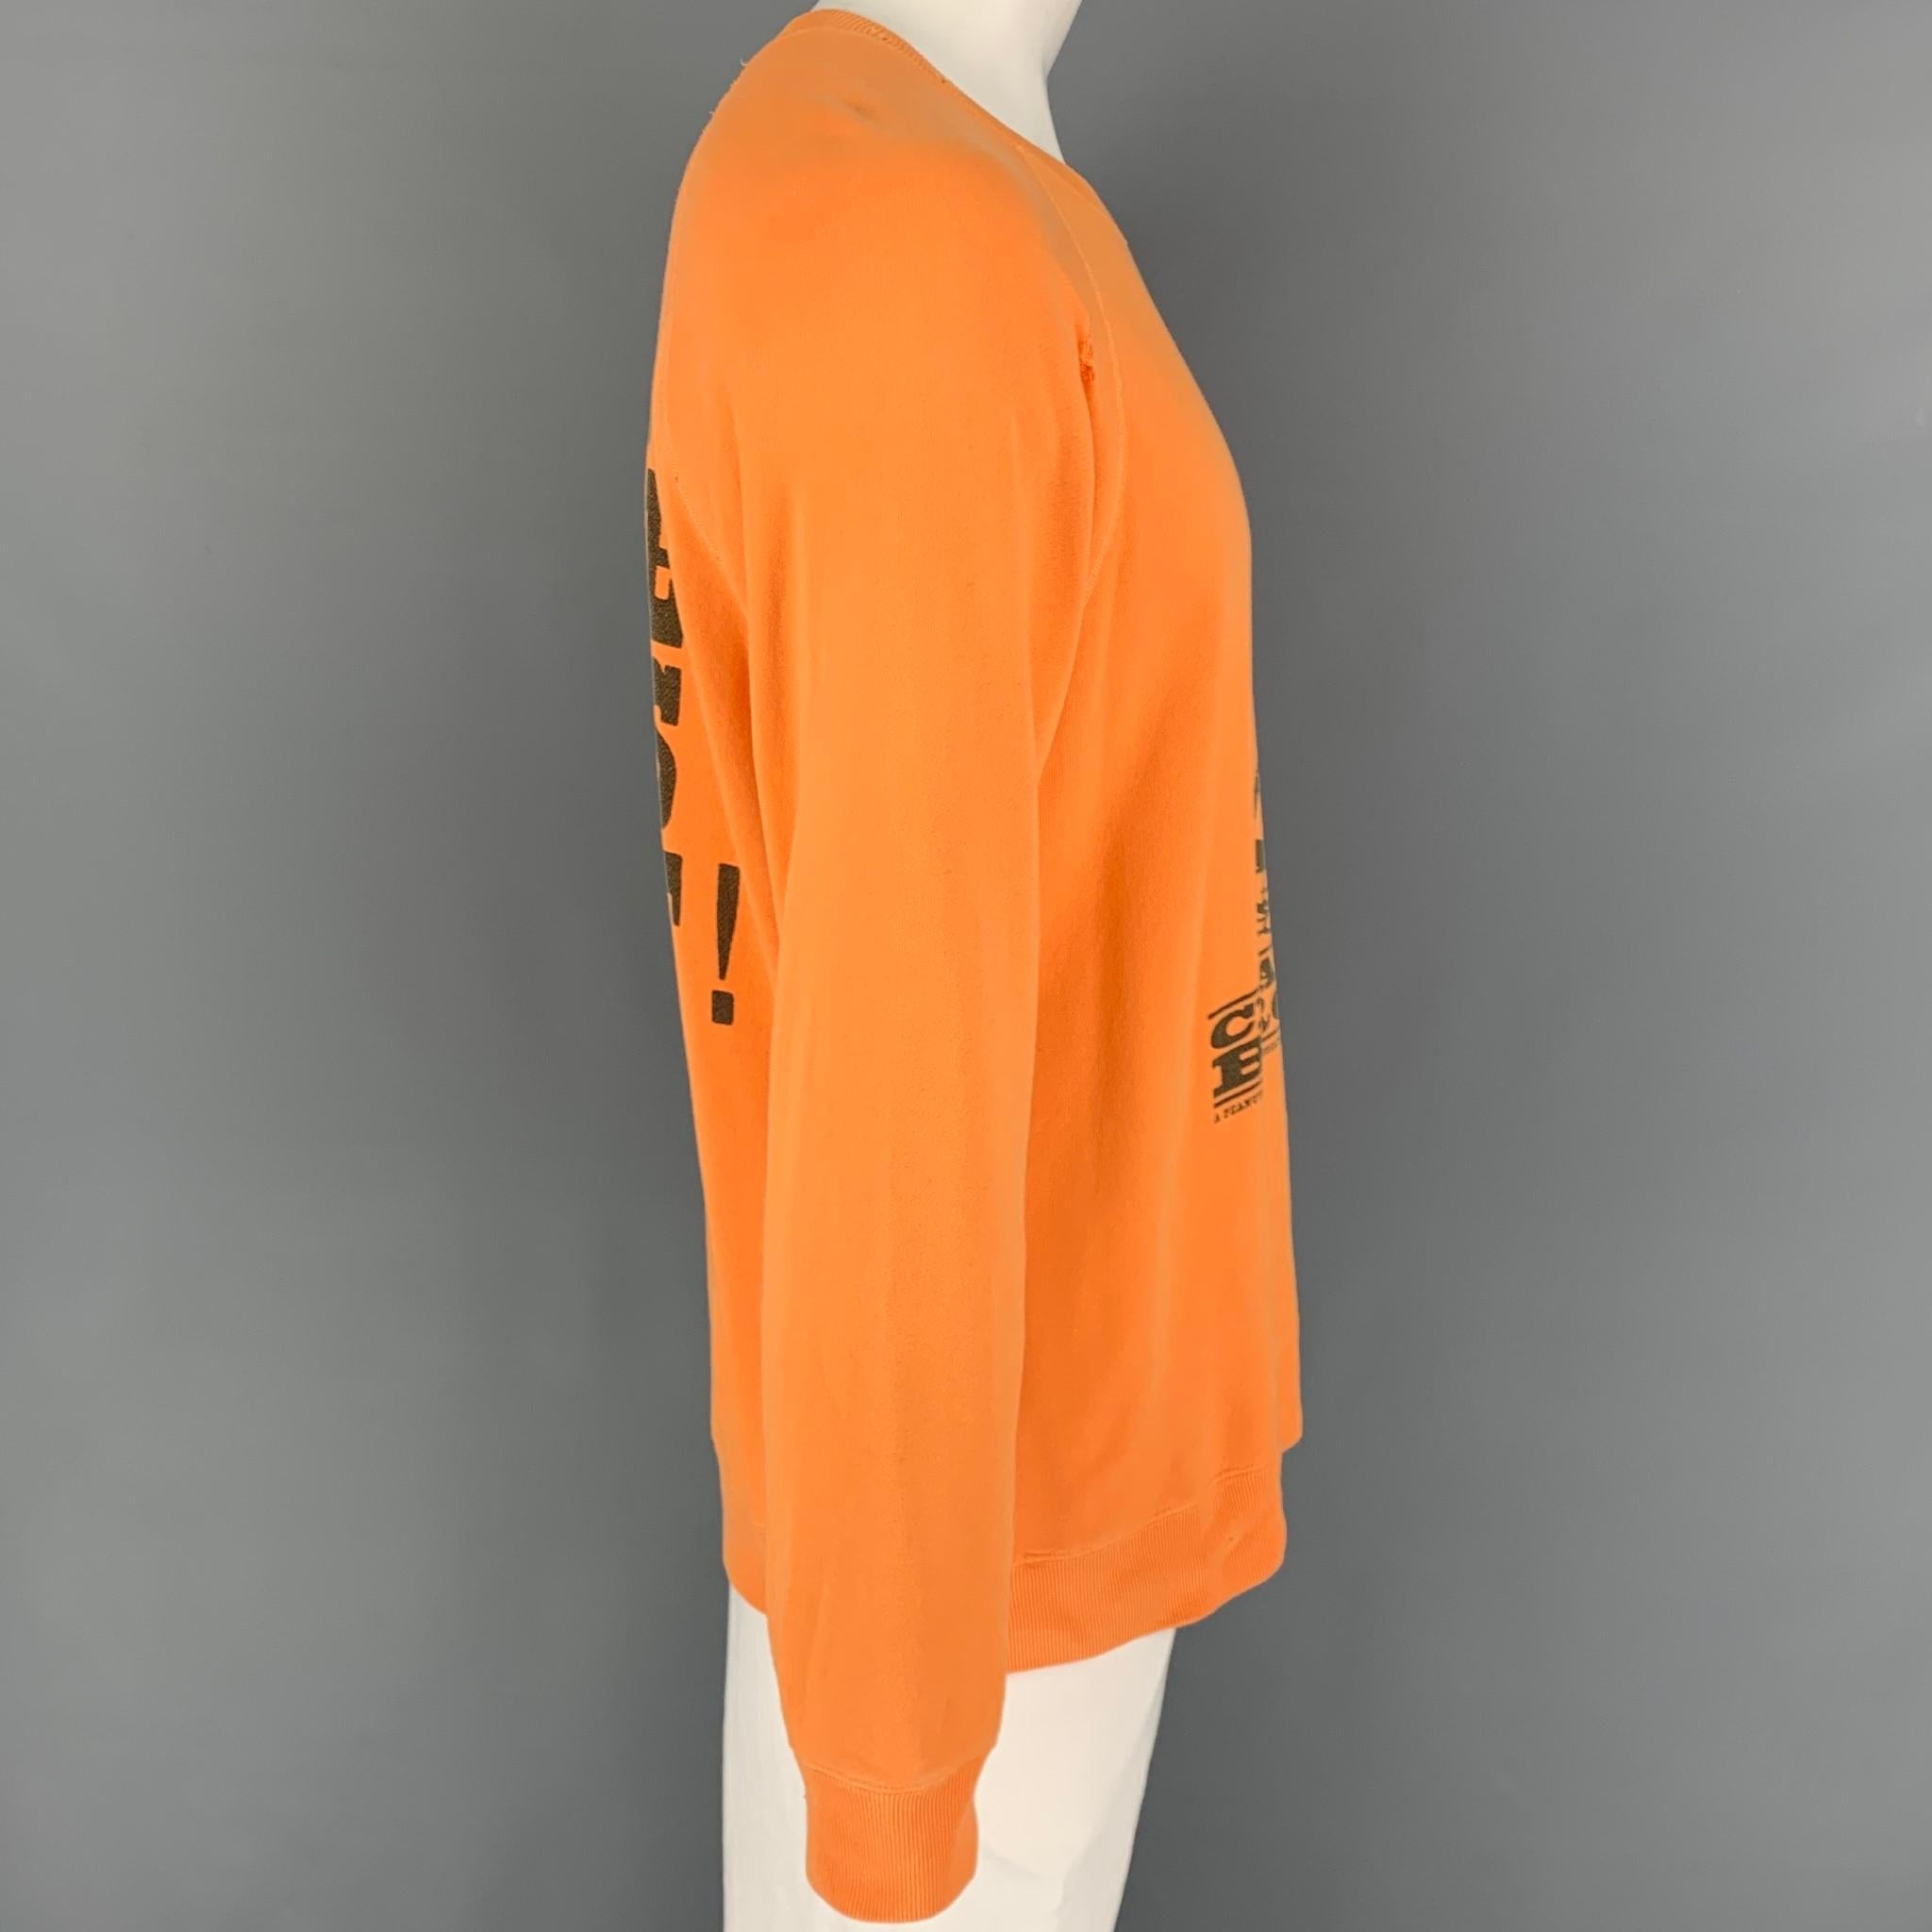 MARC JACOBS x PEANUTS sweatshirt comes in a orange & black cotton featuring a front & back graphic design, distresses details, raglan sleeves, and a crew-neck. 

Very Good Pre-Owned Condition.
Marked: L

Measurements:

Shoulder: 17 in.
Chest: 46